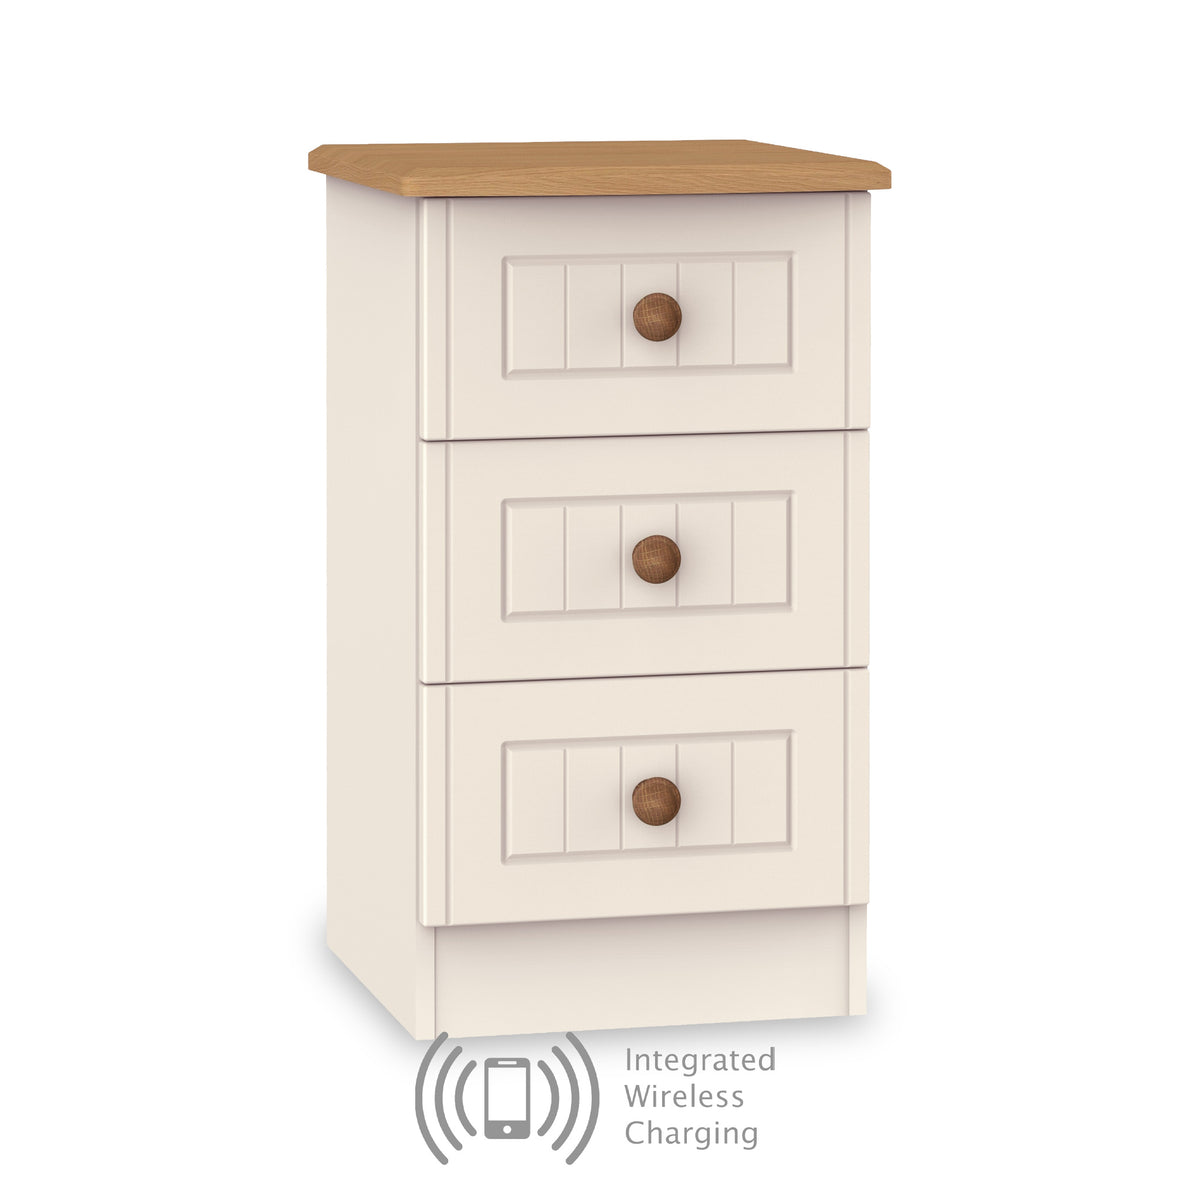 Brixham Cream Wireless Charging 3 Drawer Bedside from Roseland